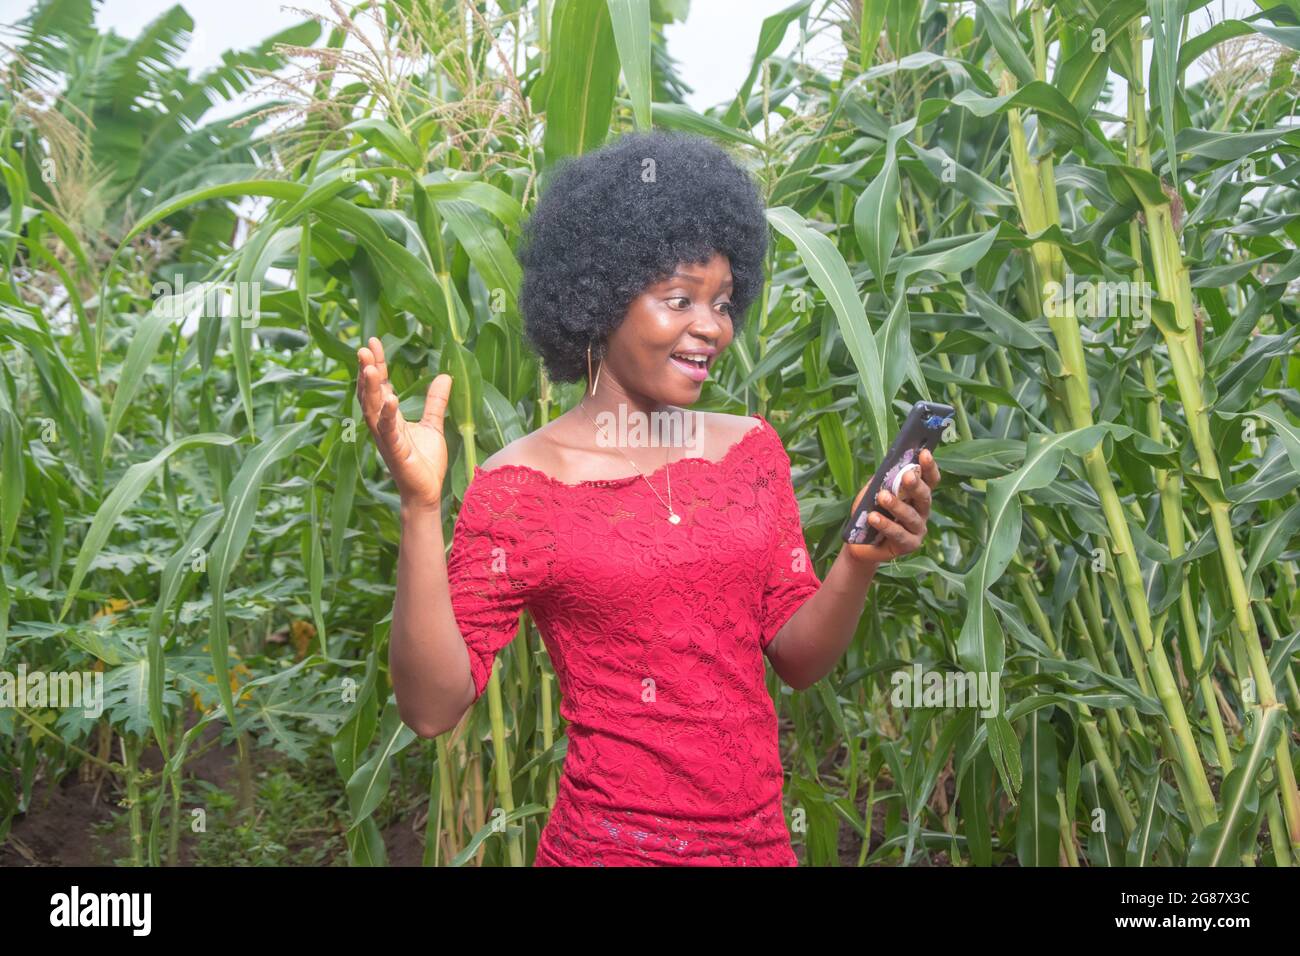 A cute African lady wearing a red dress and afro hair style, happily looking at the camera and holding a handset smartphone with both hands, on farm Stock Photo